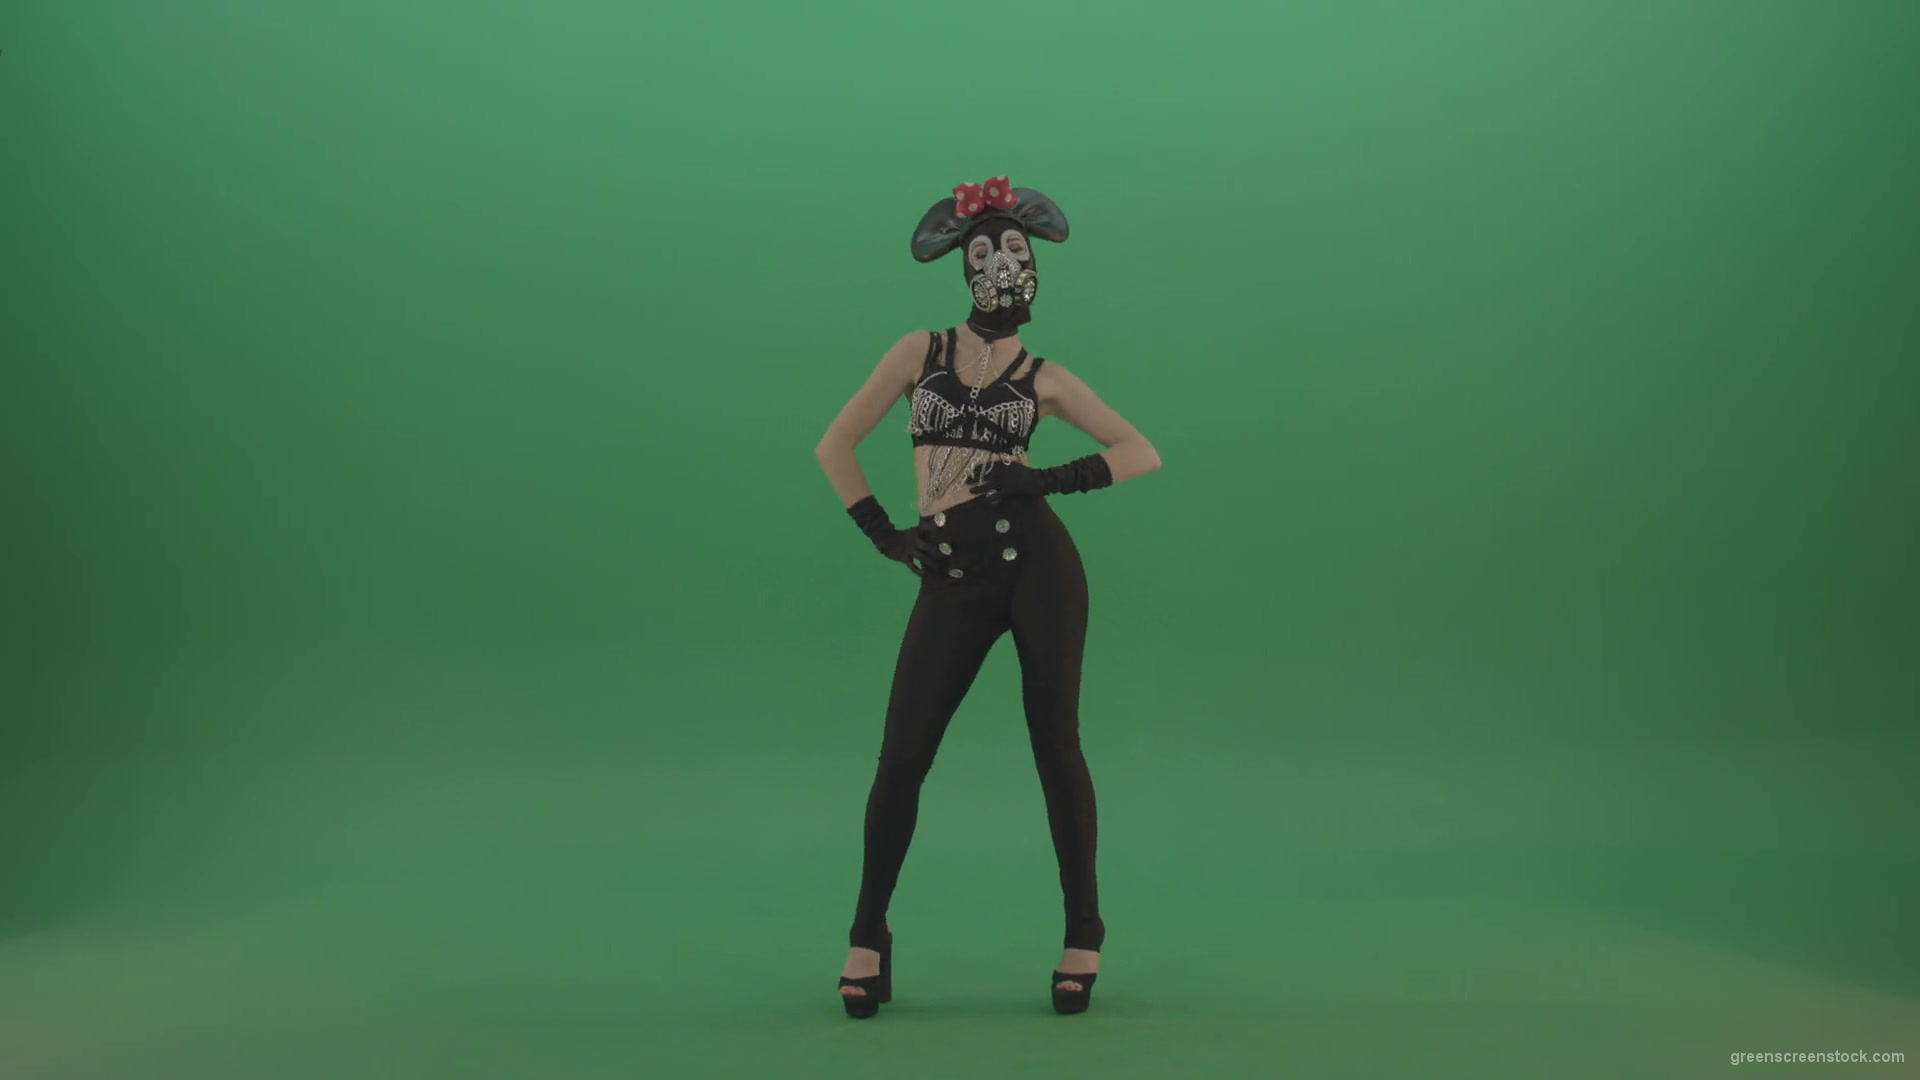 Full-size-strip-girl-in-mouse-costume-and-mask-shaking-ass-and-dancing-on-green-screen-1920_006 Green Screen Stock